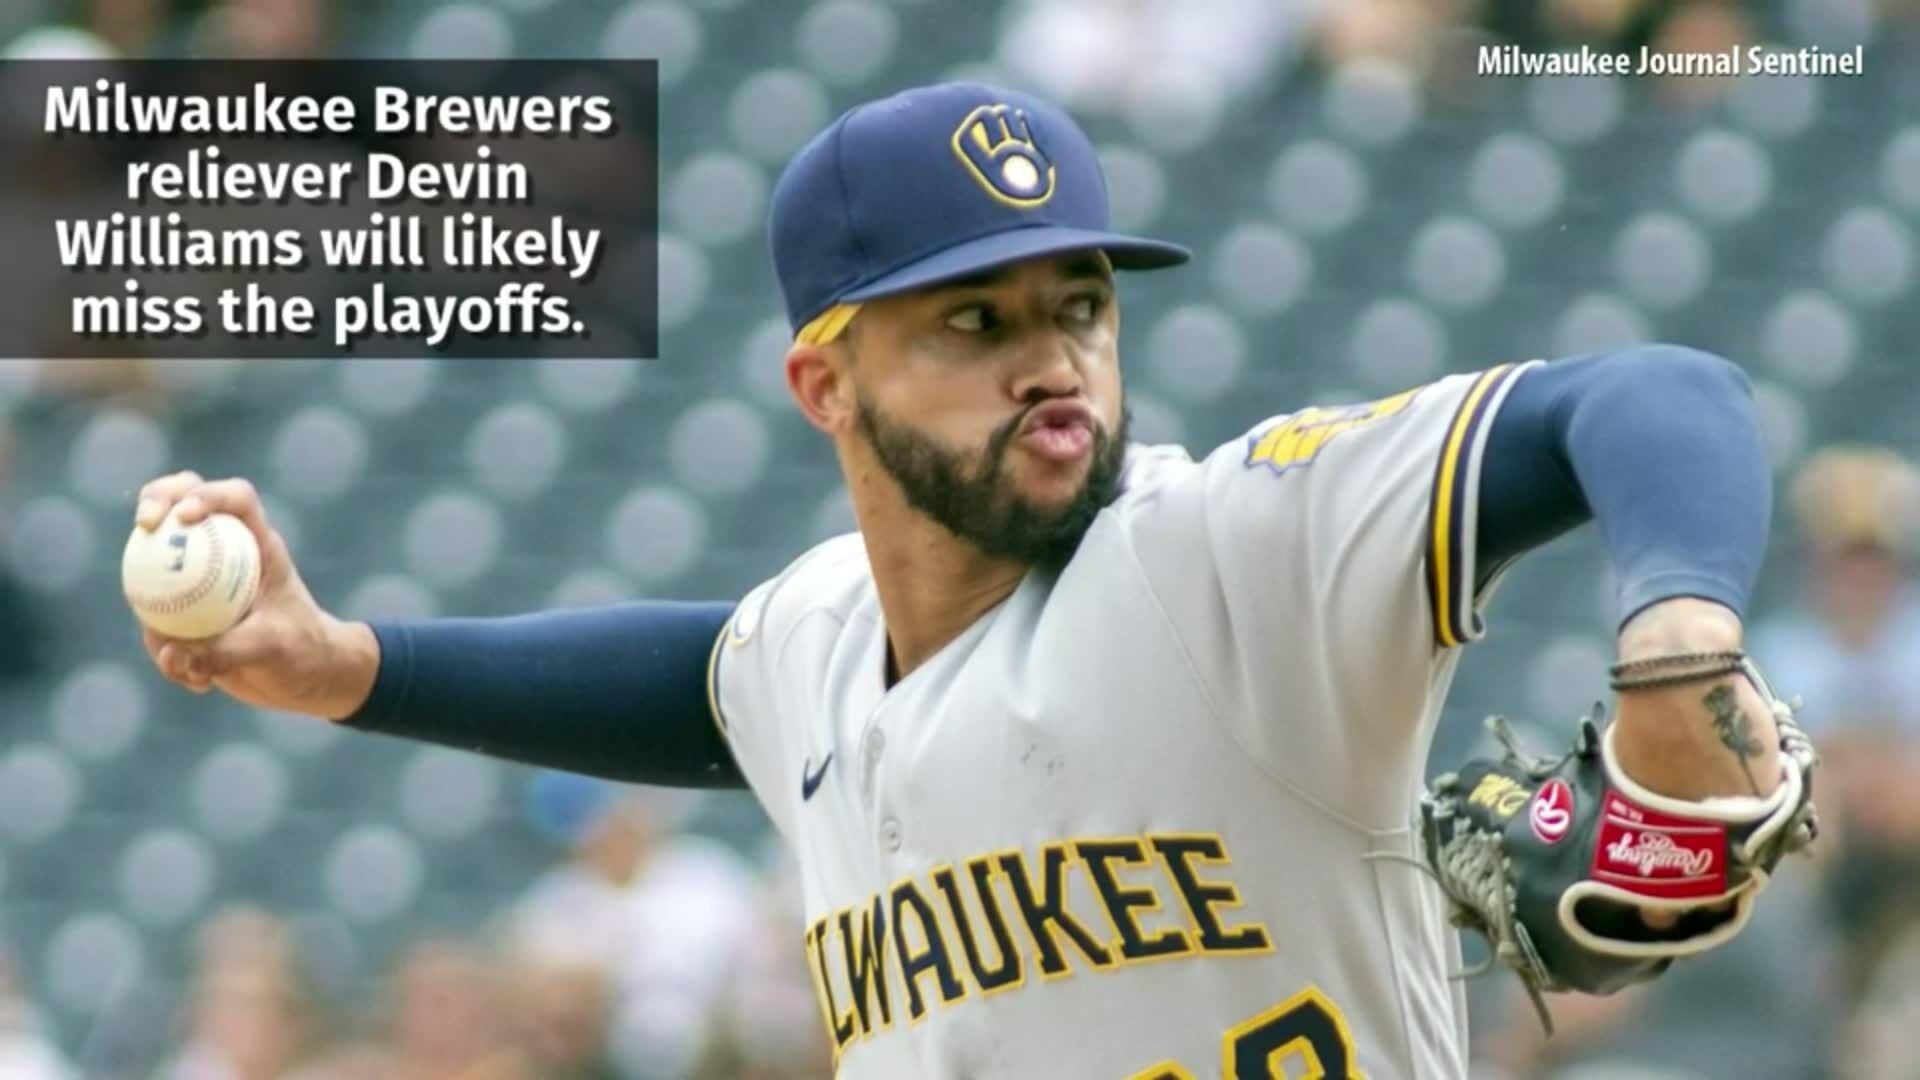 Punch out: Brewers reliever Devin Williams breaks hand after hitting wall, Trending